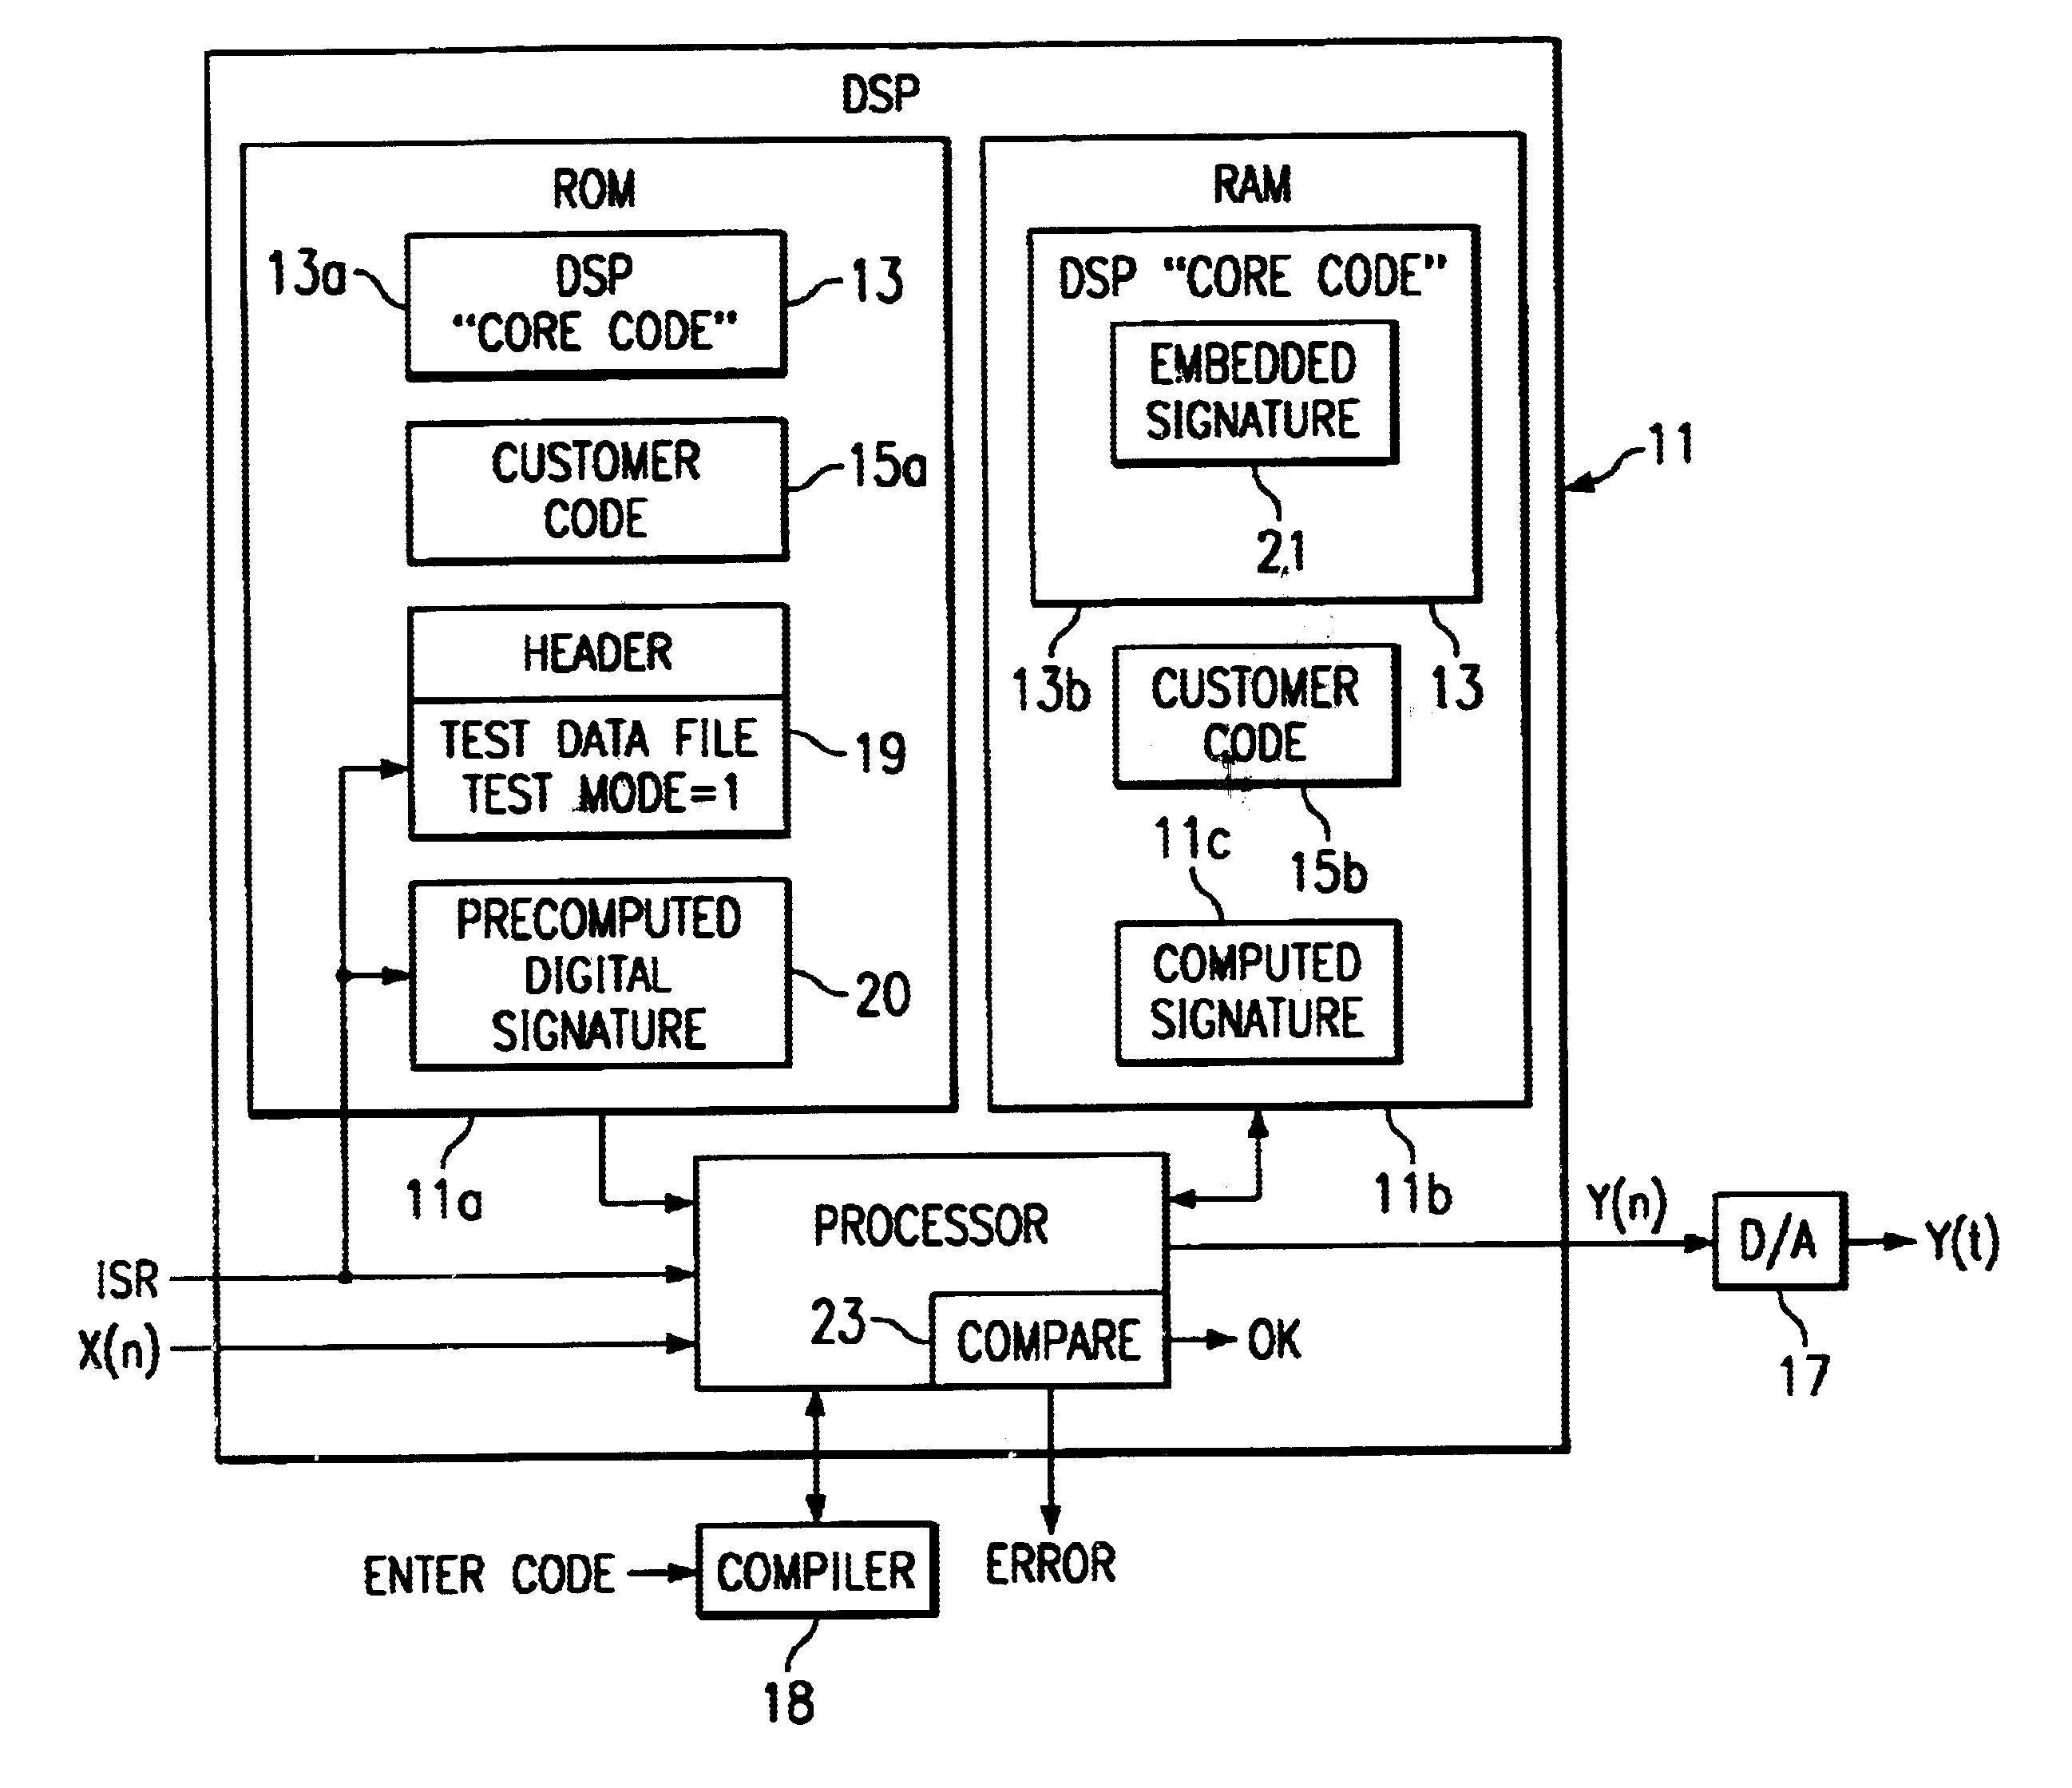 Method and system for testing the performance of DSP